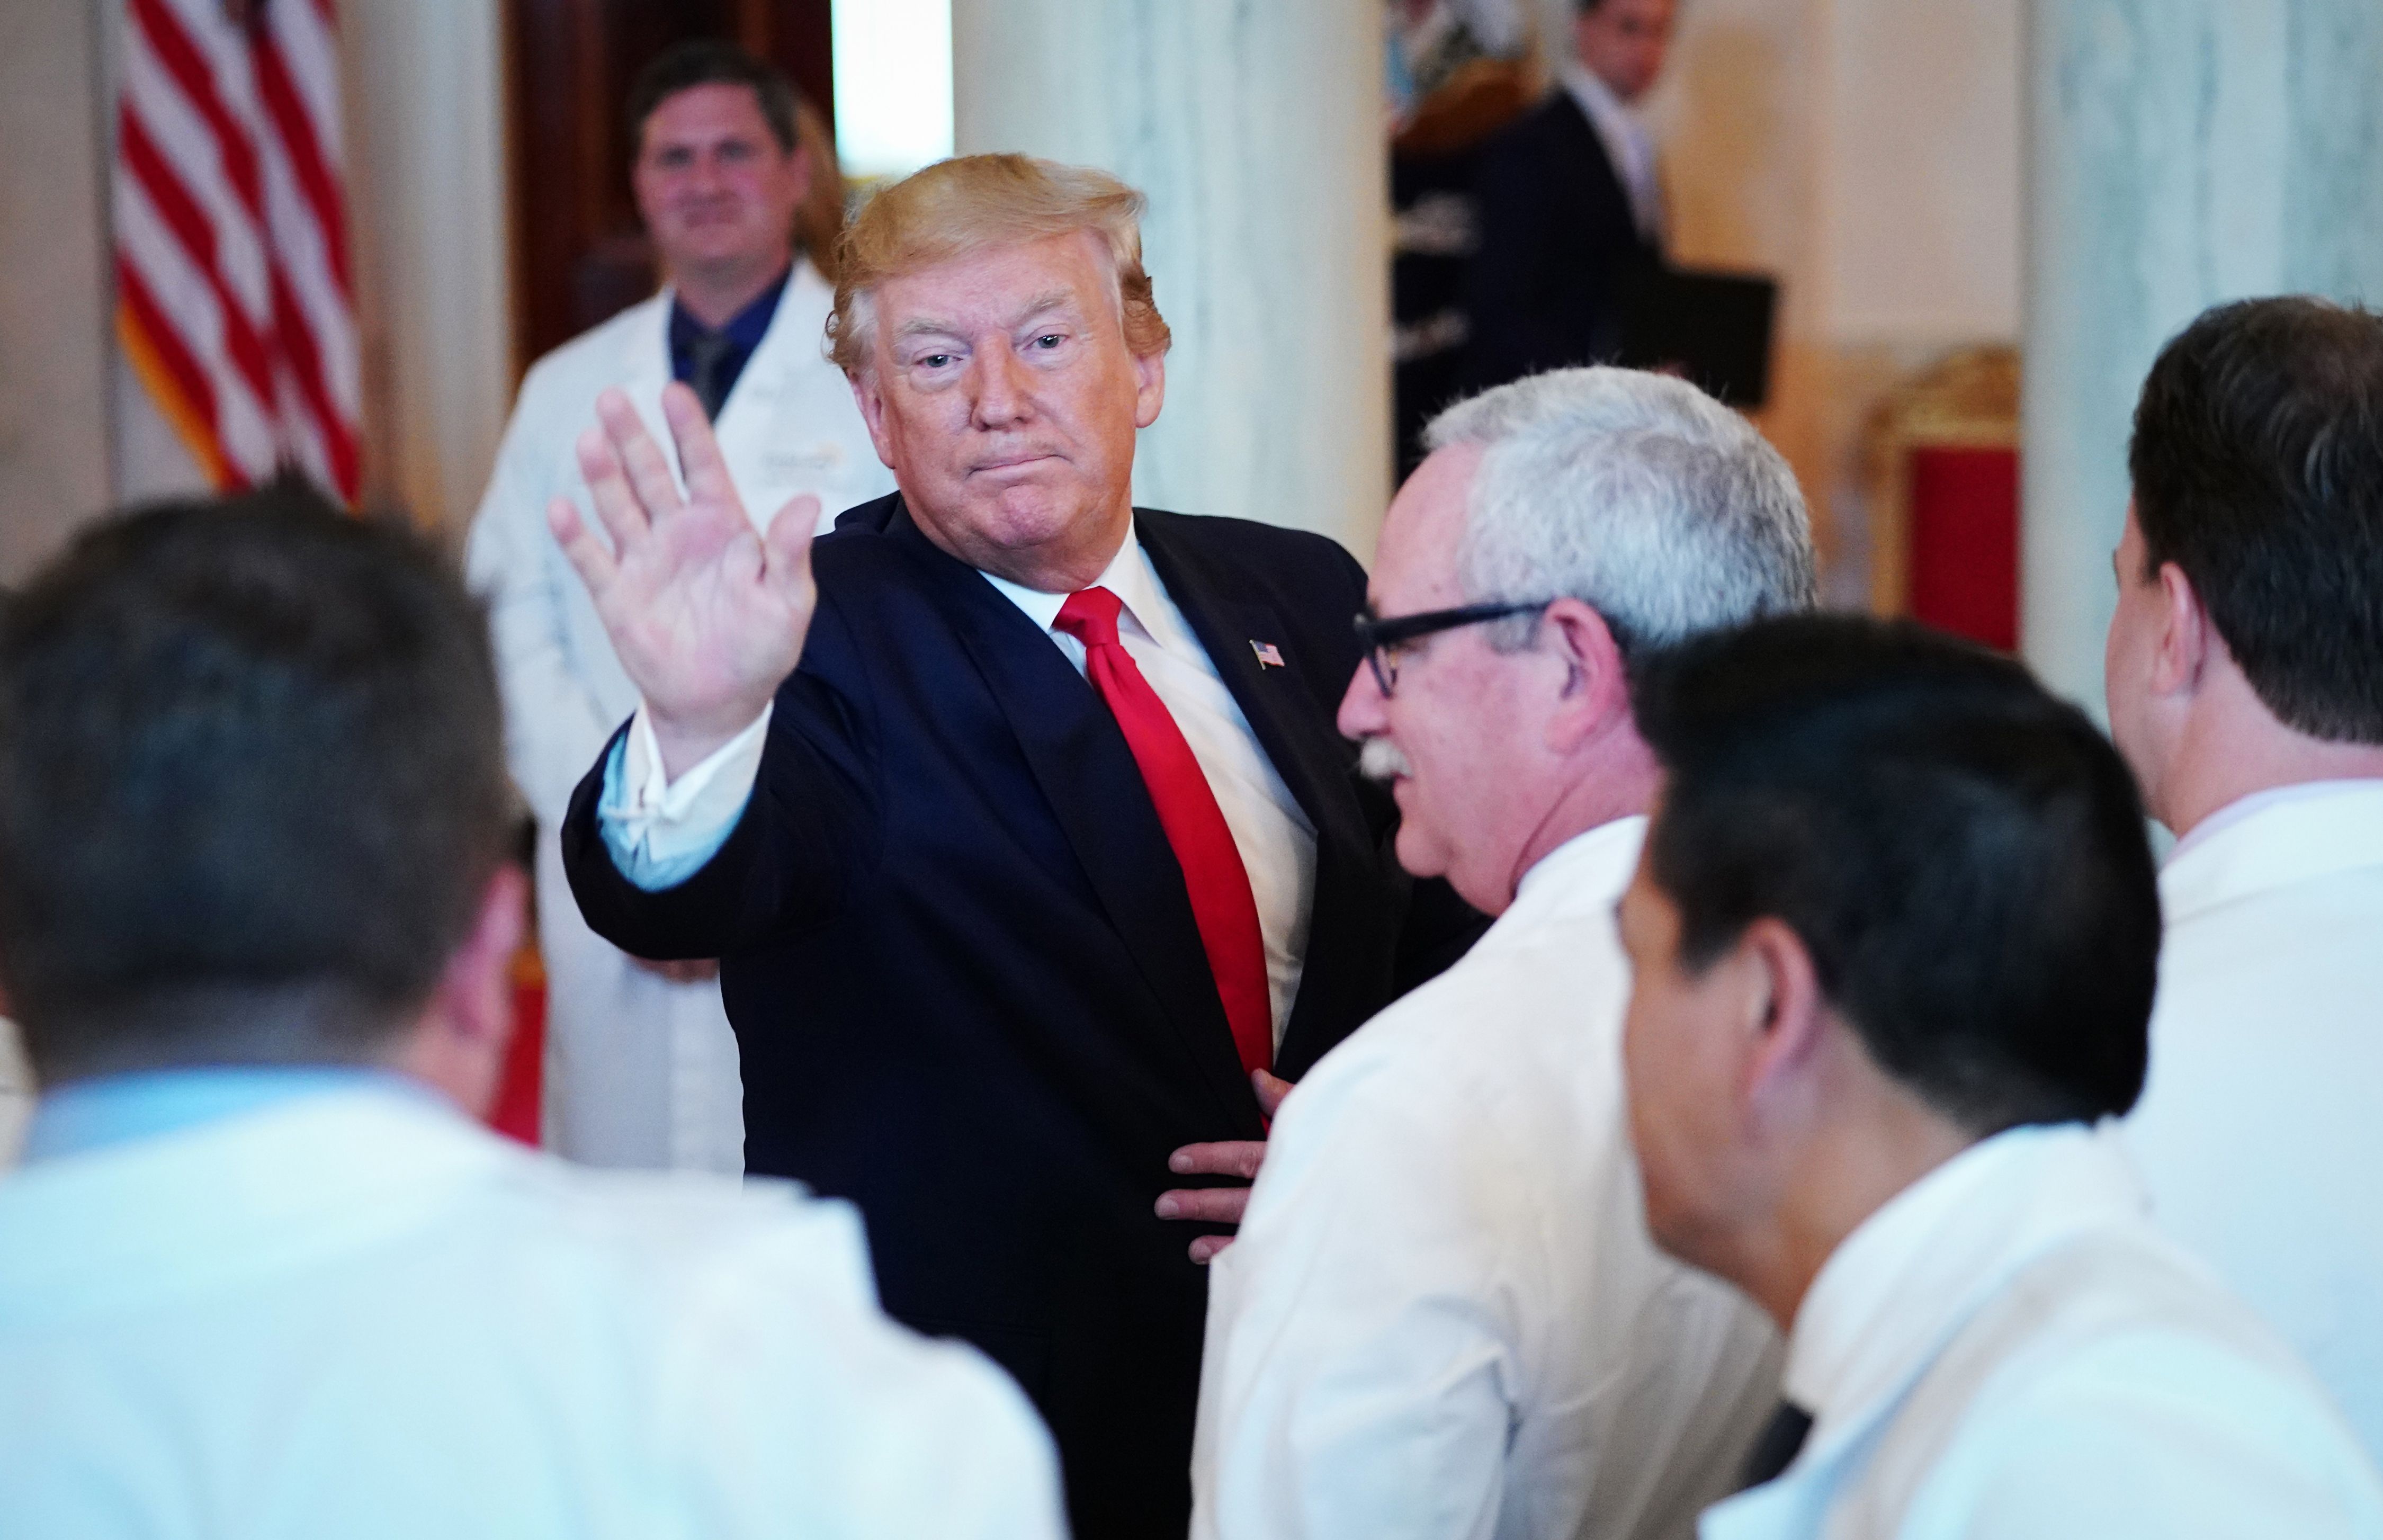 US President Donald Trump waves after signing an executive order on "improving price and quality transparency in healthcare" in the Grand Foyer of the White House in Washington, DC on June 24, 2019. (Photo by MANDEL NGAN / AFP)